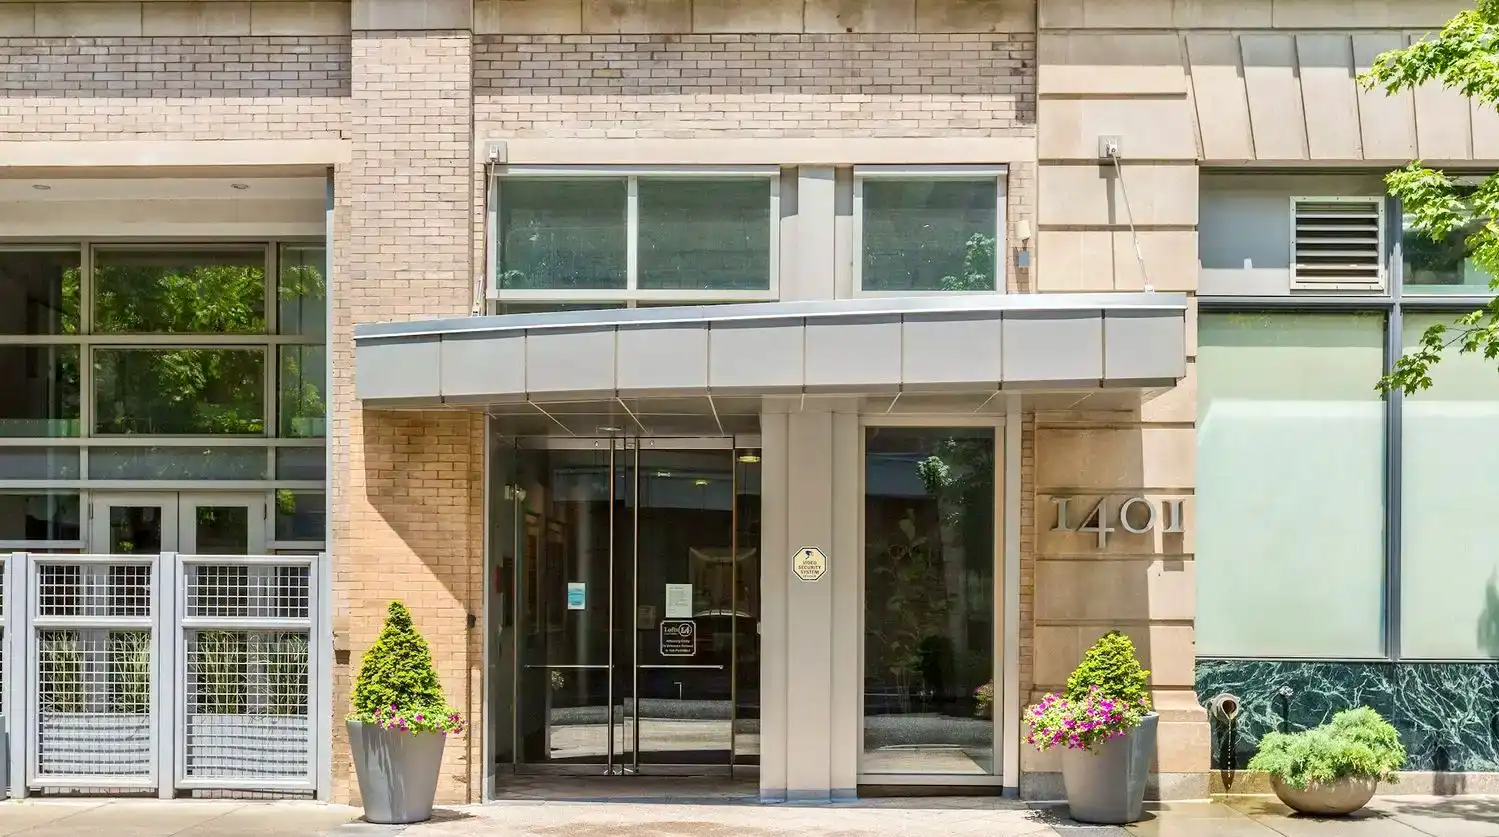 Experience the unique charm of urban living at The Loft 14 Condos, located at 1401 Church Street in Washington D.C.'